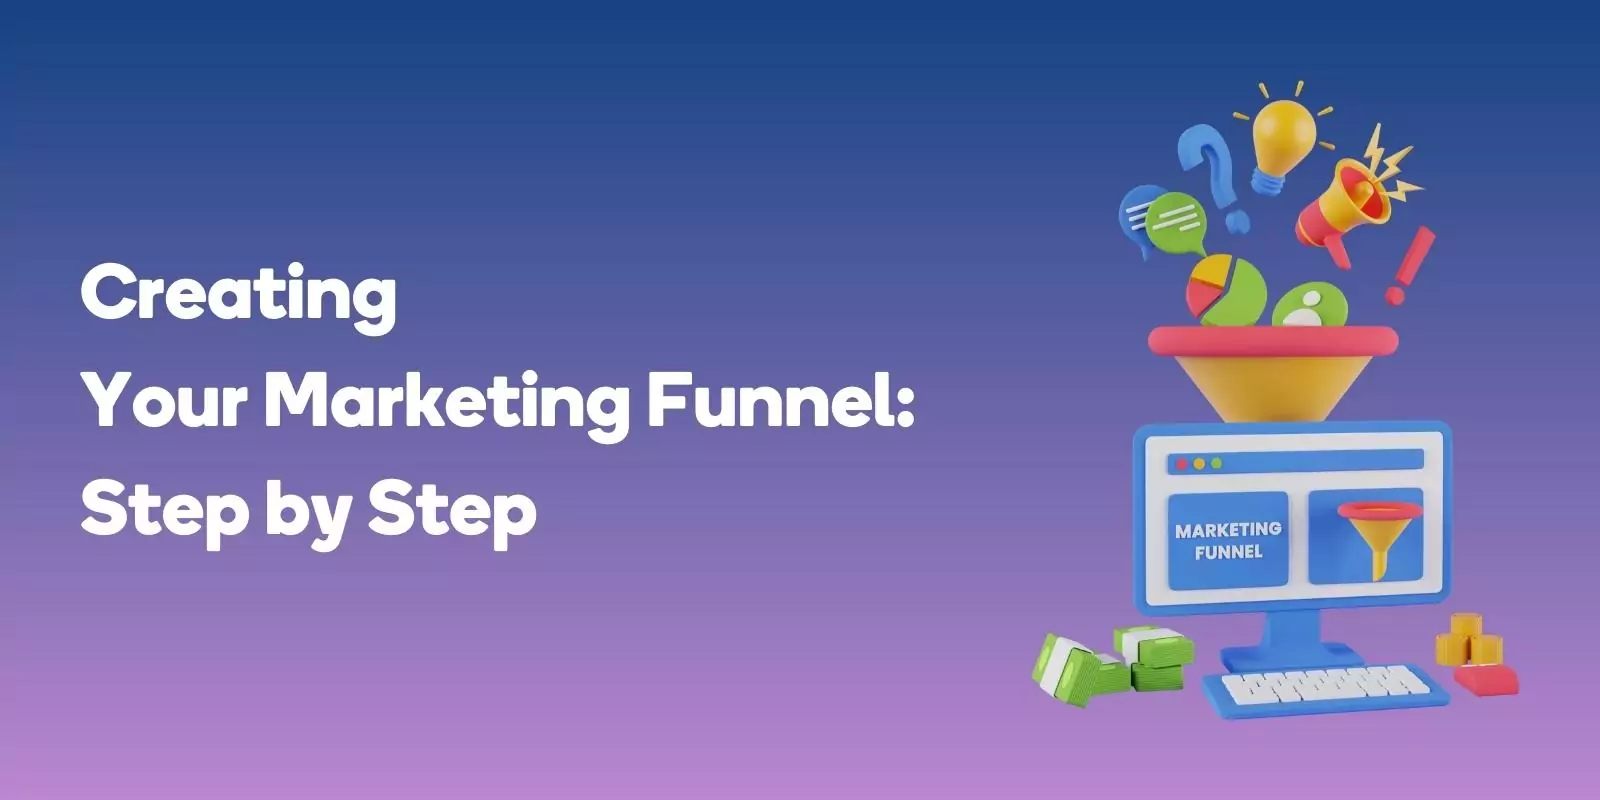 Creating Your Marketing Funnel: Step by Step